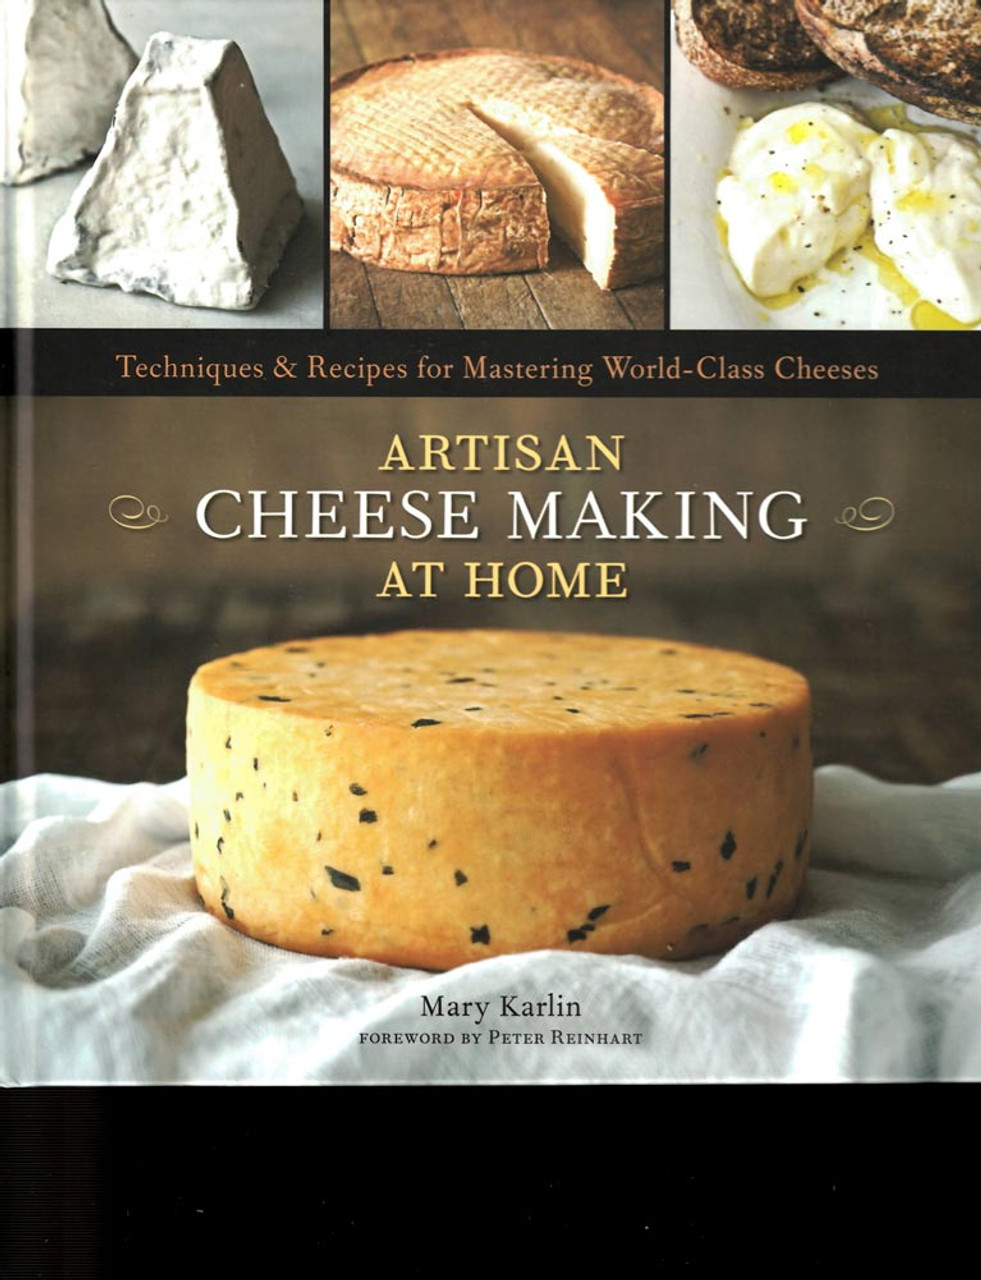 https://cdn11.bigcommerce.com/s-ohhf8/images/stencil/1280x1280/products/200/3685/Book_ArtisanCheesemakingAtHome__96256.1571683833.jpg?c=2